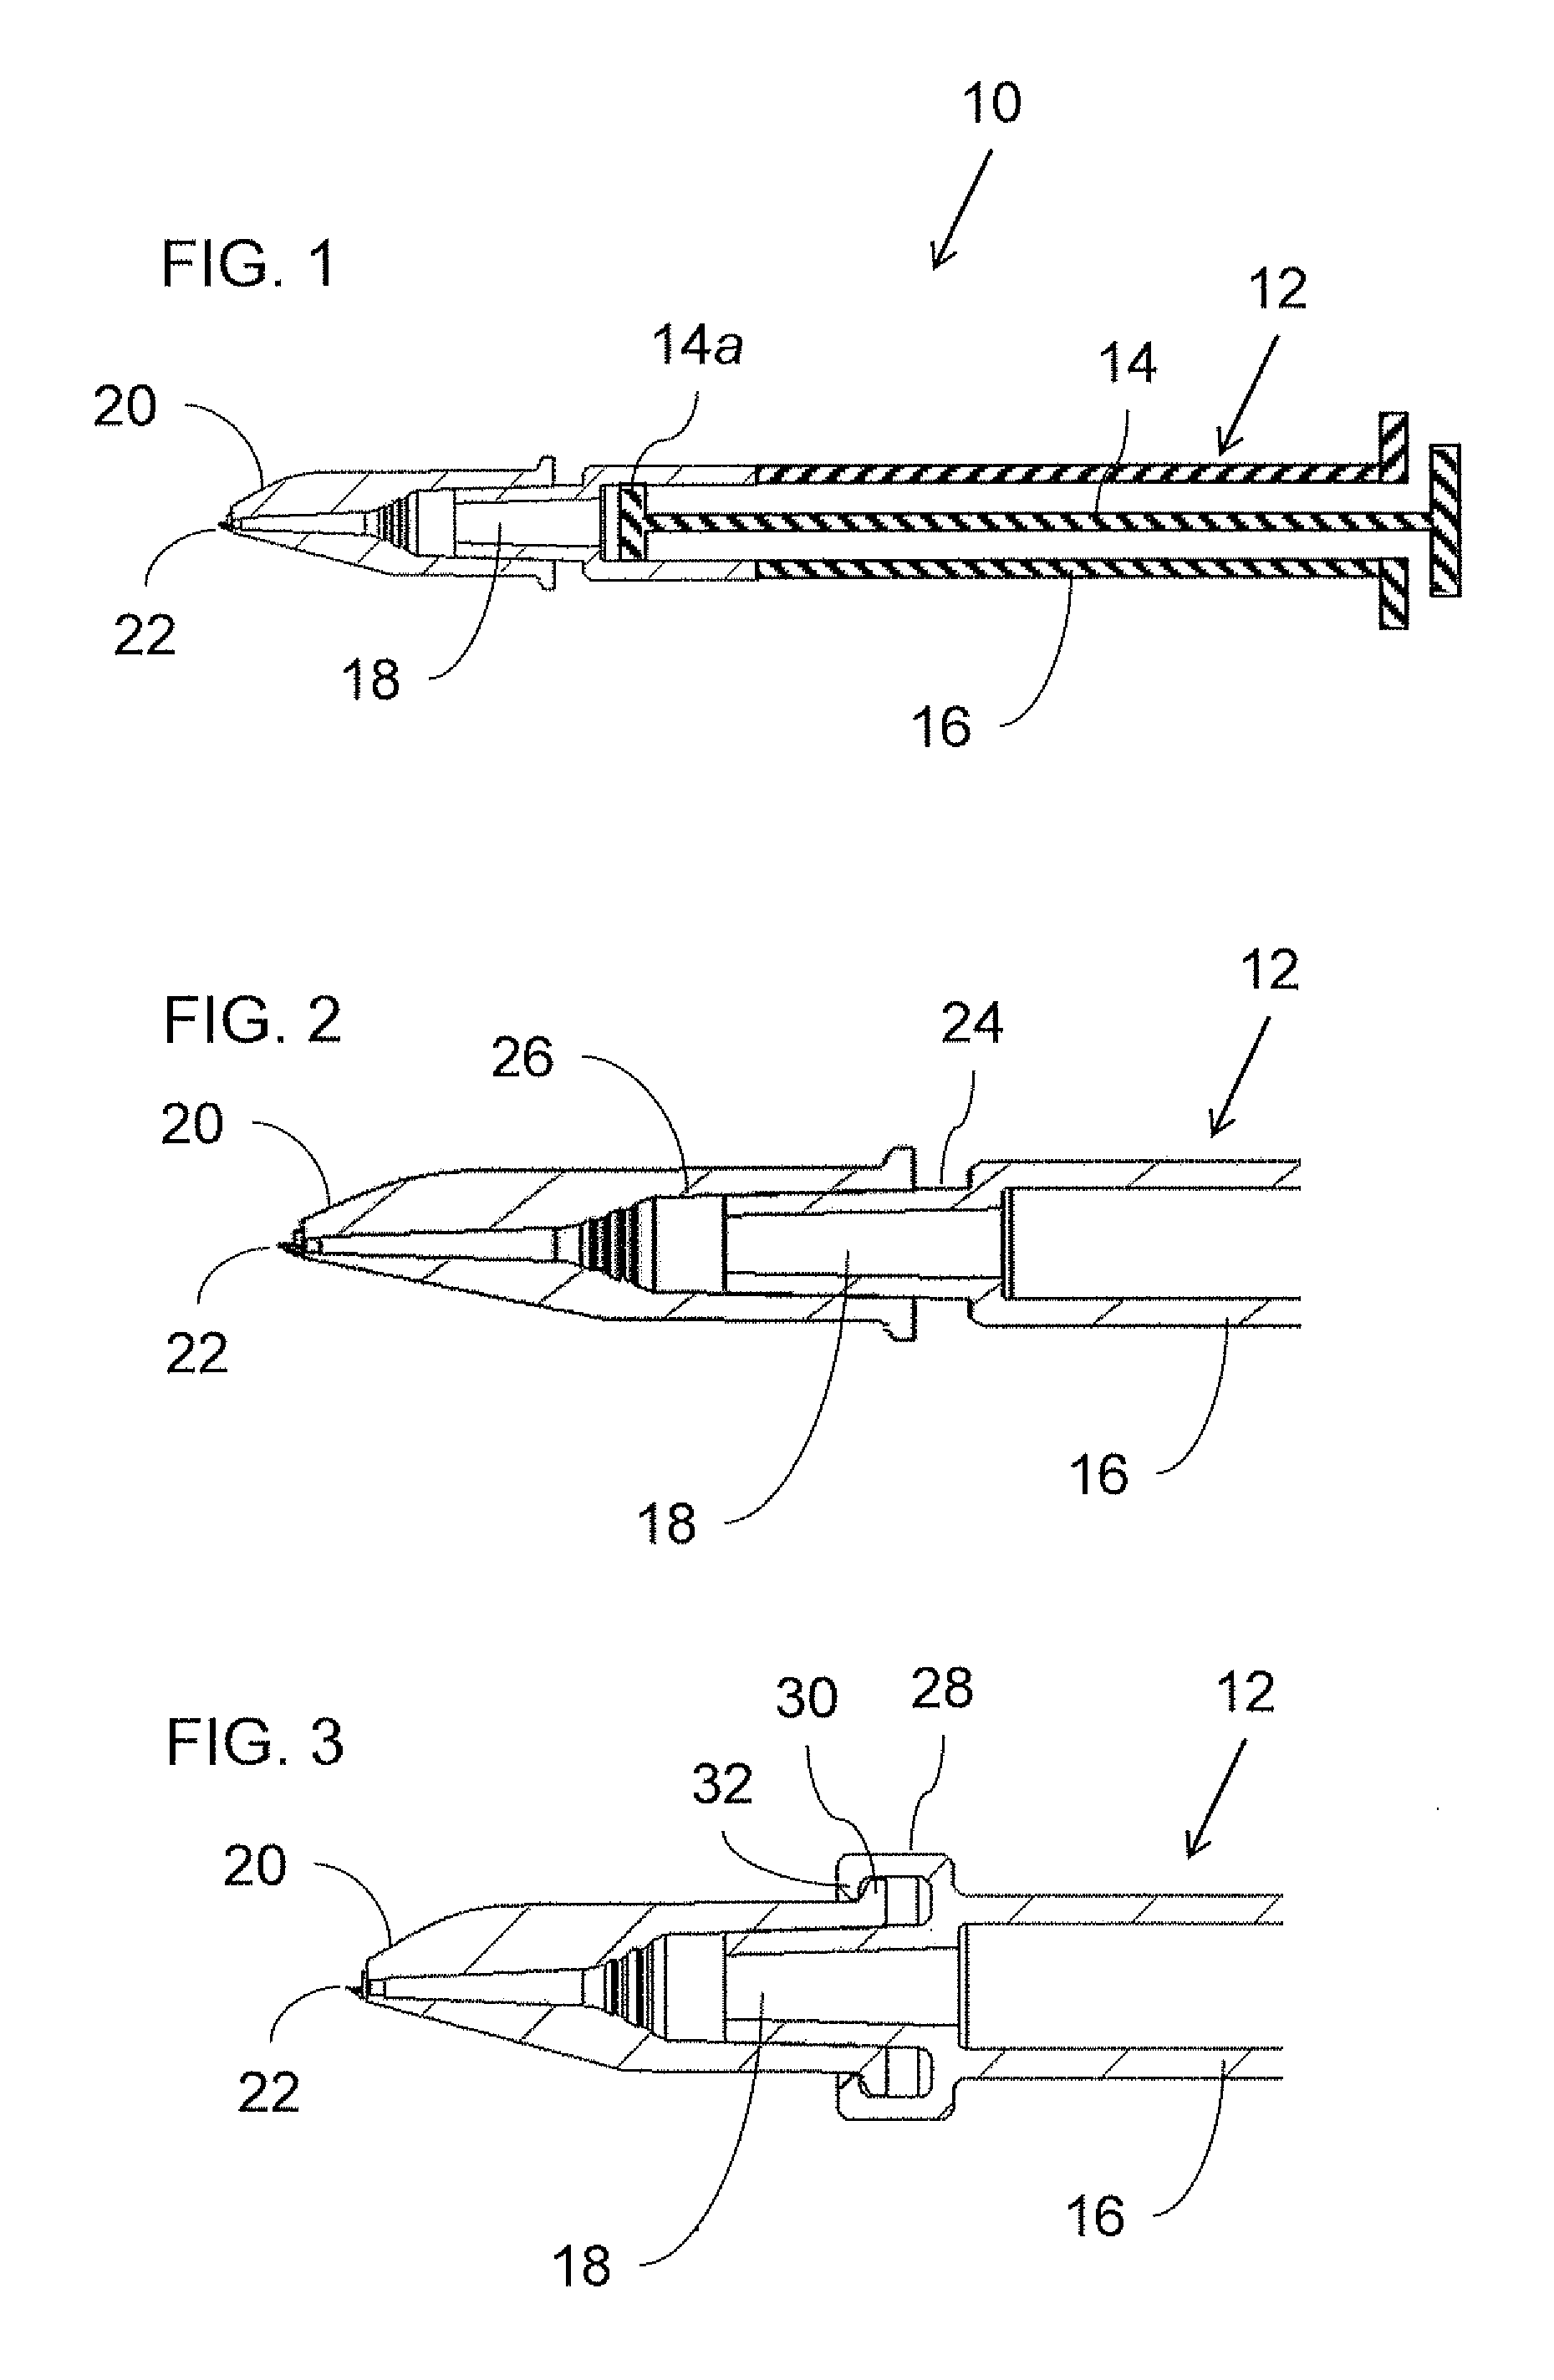 Microneedle Intradermal Drug Delivery Device with Auto-Disable Functionality